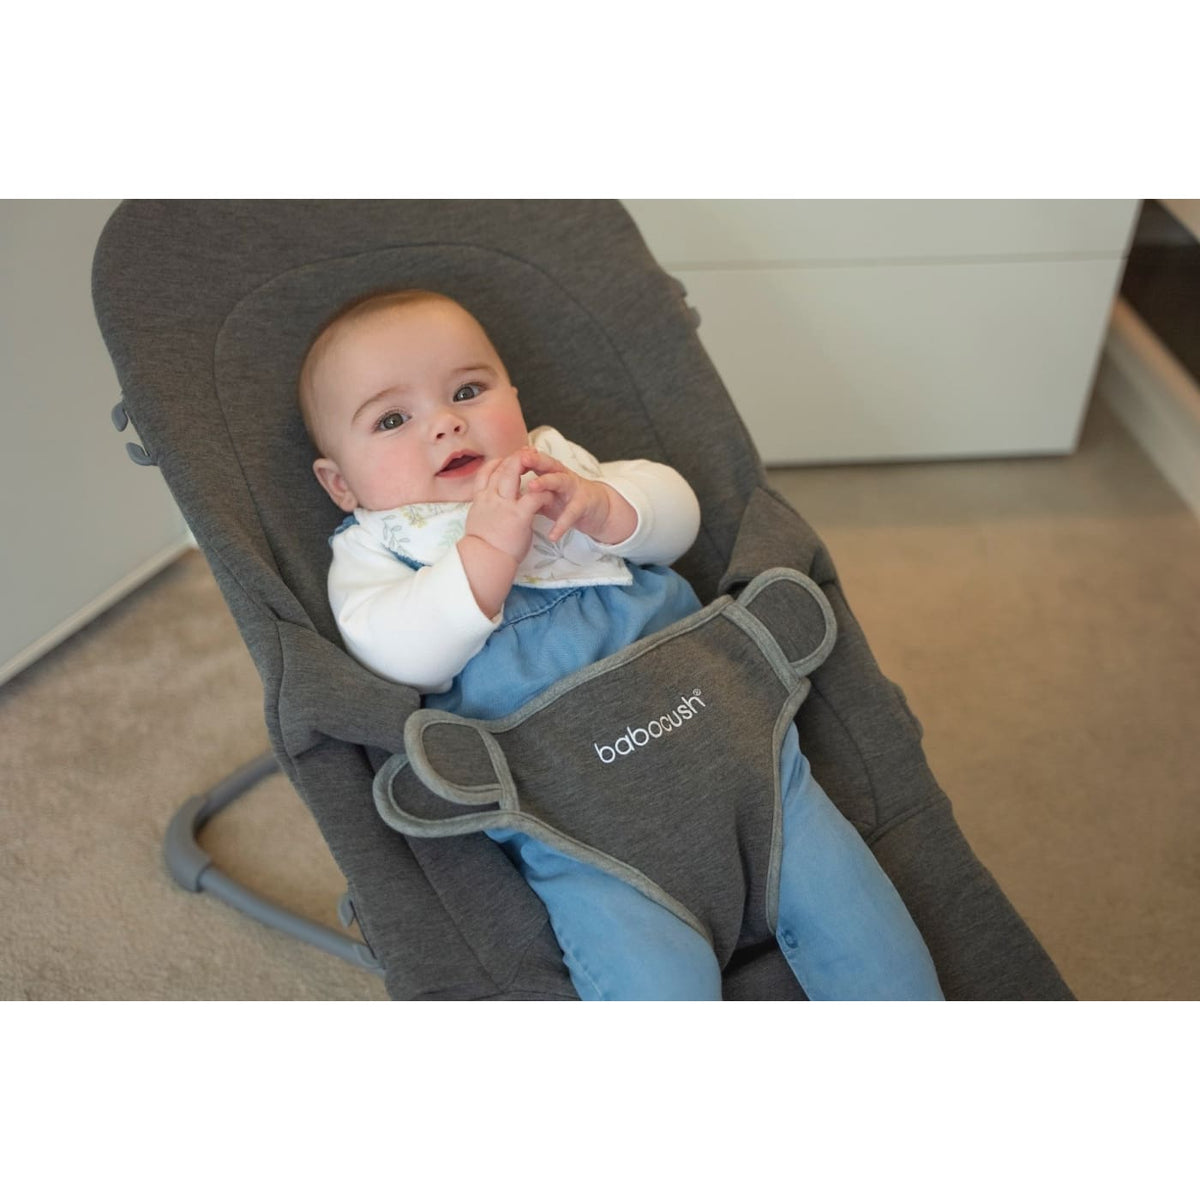 Babocush Baby Bouncer - TOYS &amp; PLAY - ROCKERS/BOUNCERS